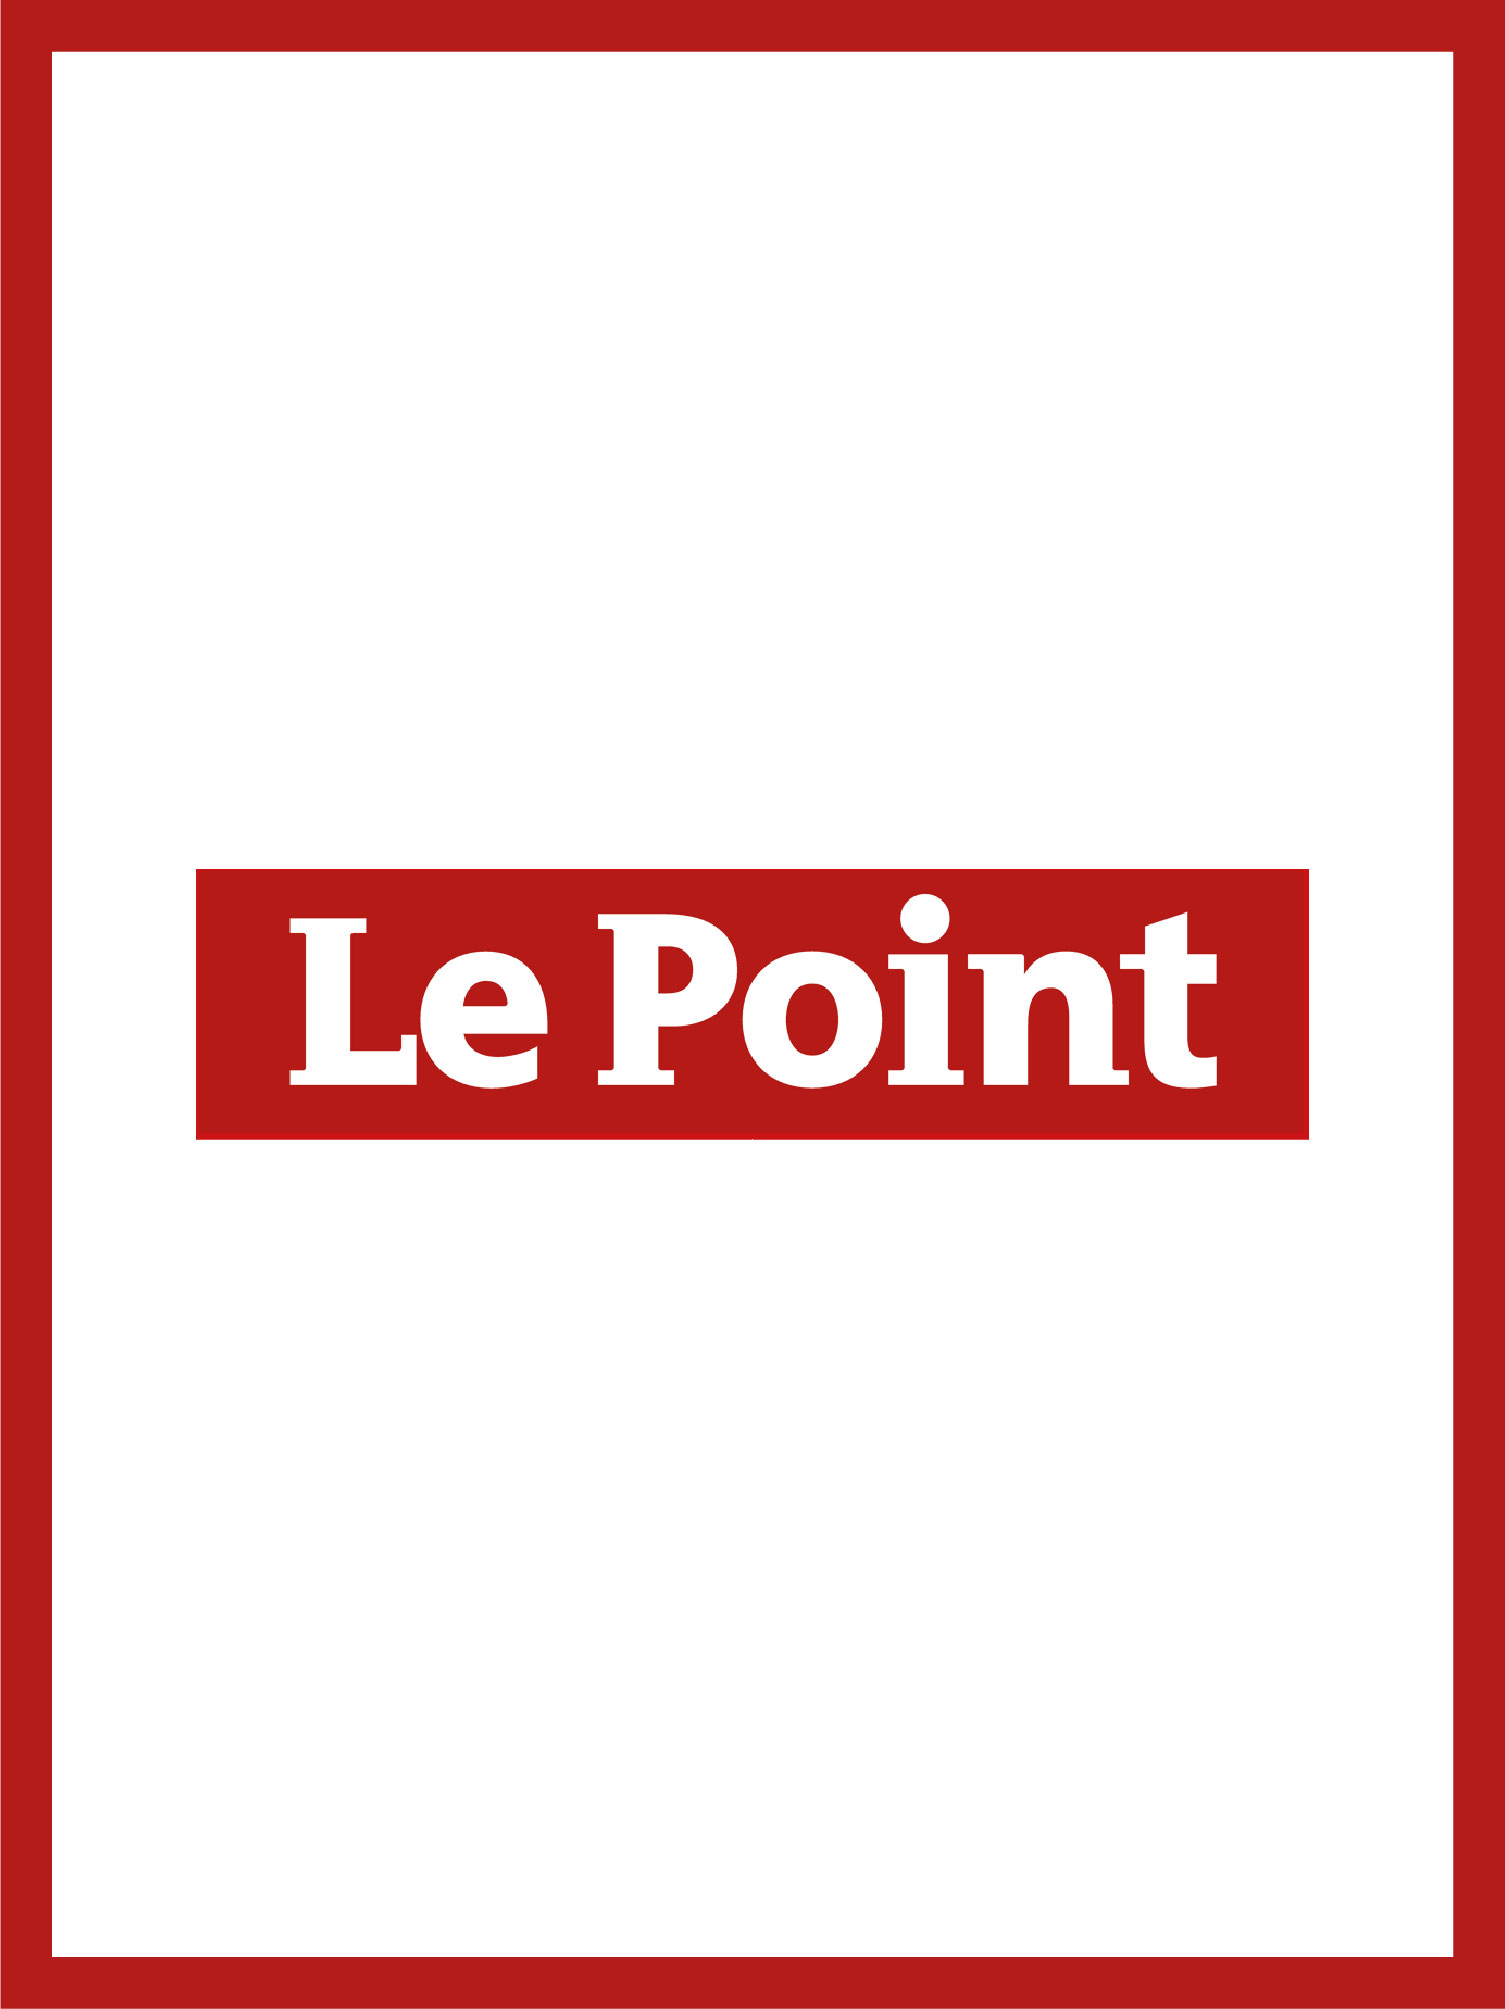 cover of the magazine le point and article on the studio jean-philippe nuel